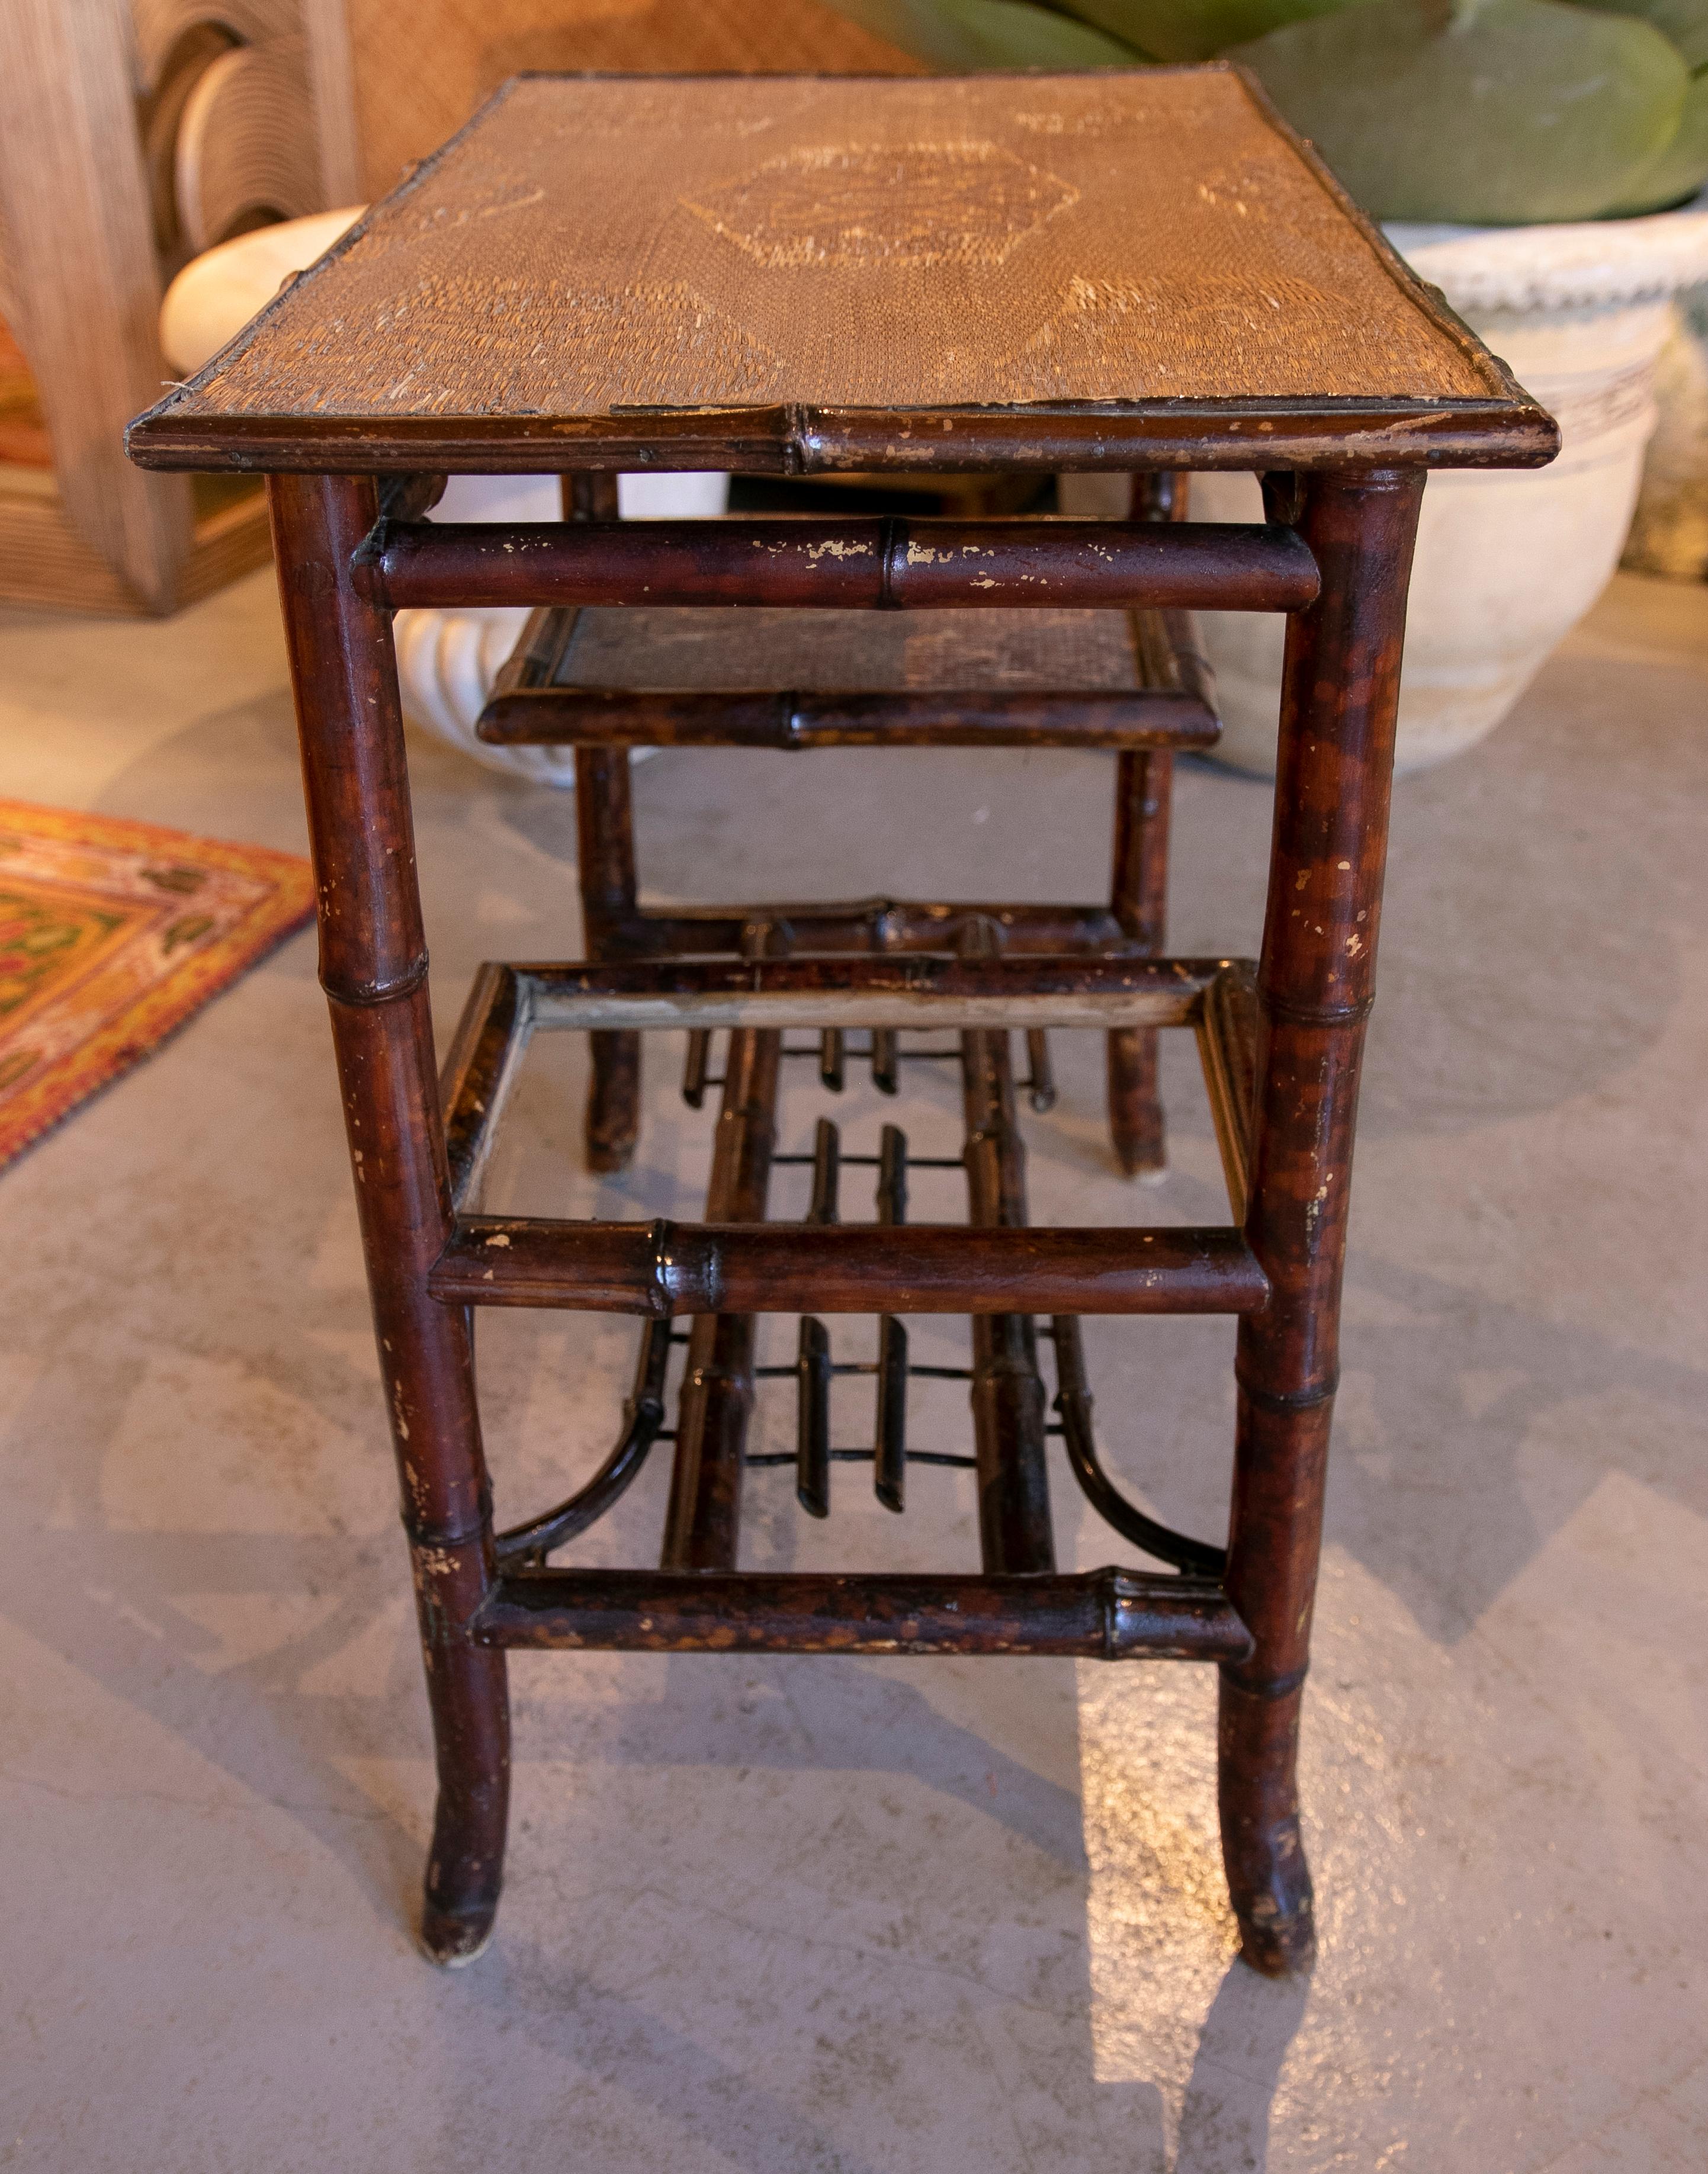 Chinese Bamboo Sidetable with Wicker Shelves and Top from the 1950ies For Sale 16